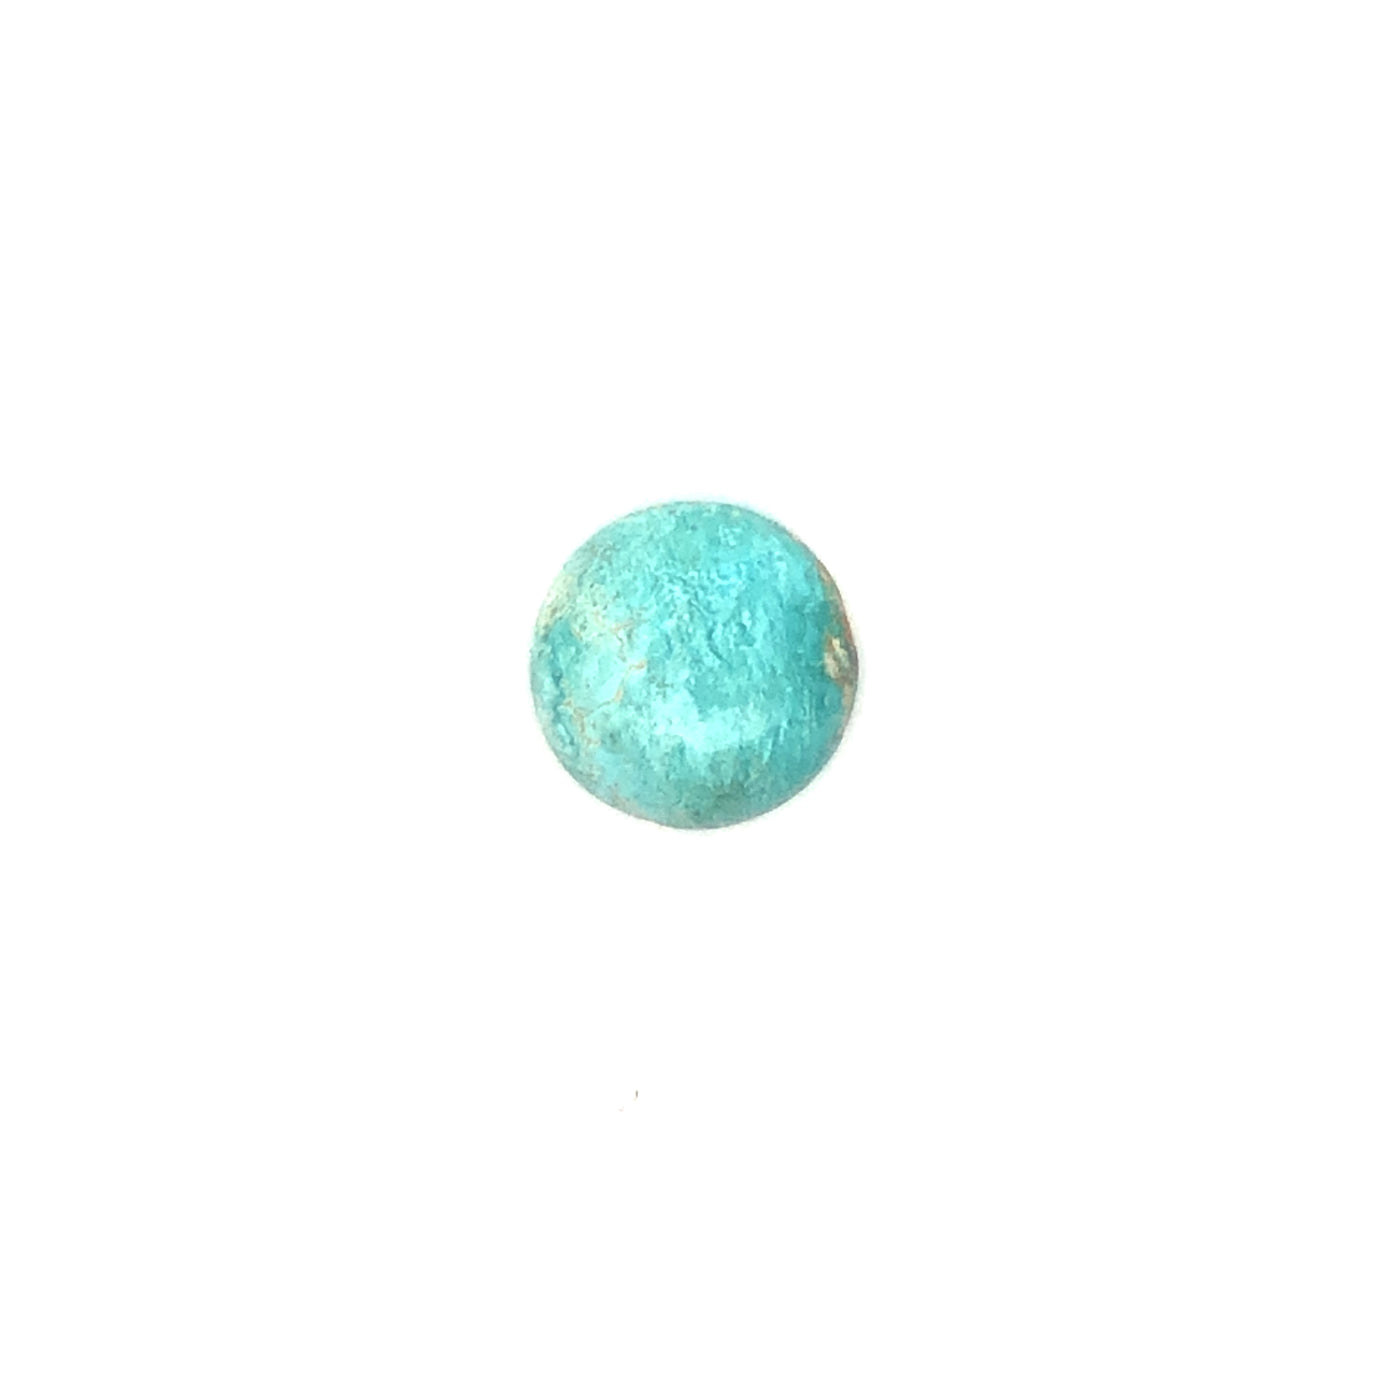 Loose Narooma Turquoise Round Shaped 9.58Ct Blue With Some Brown/White